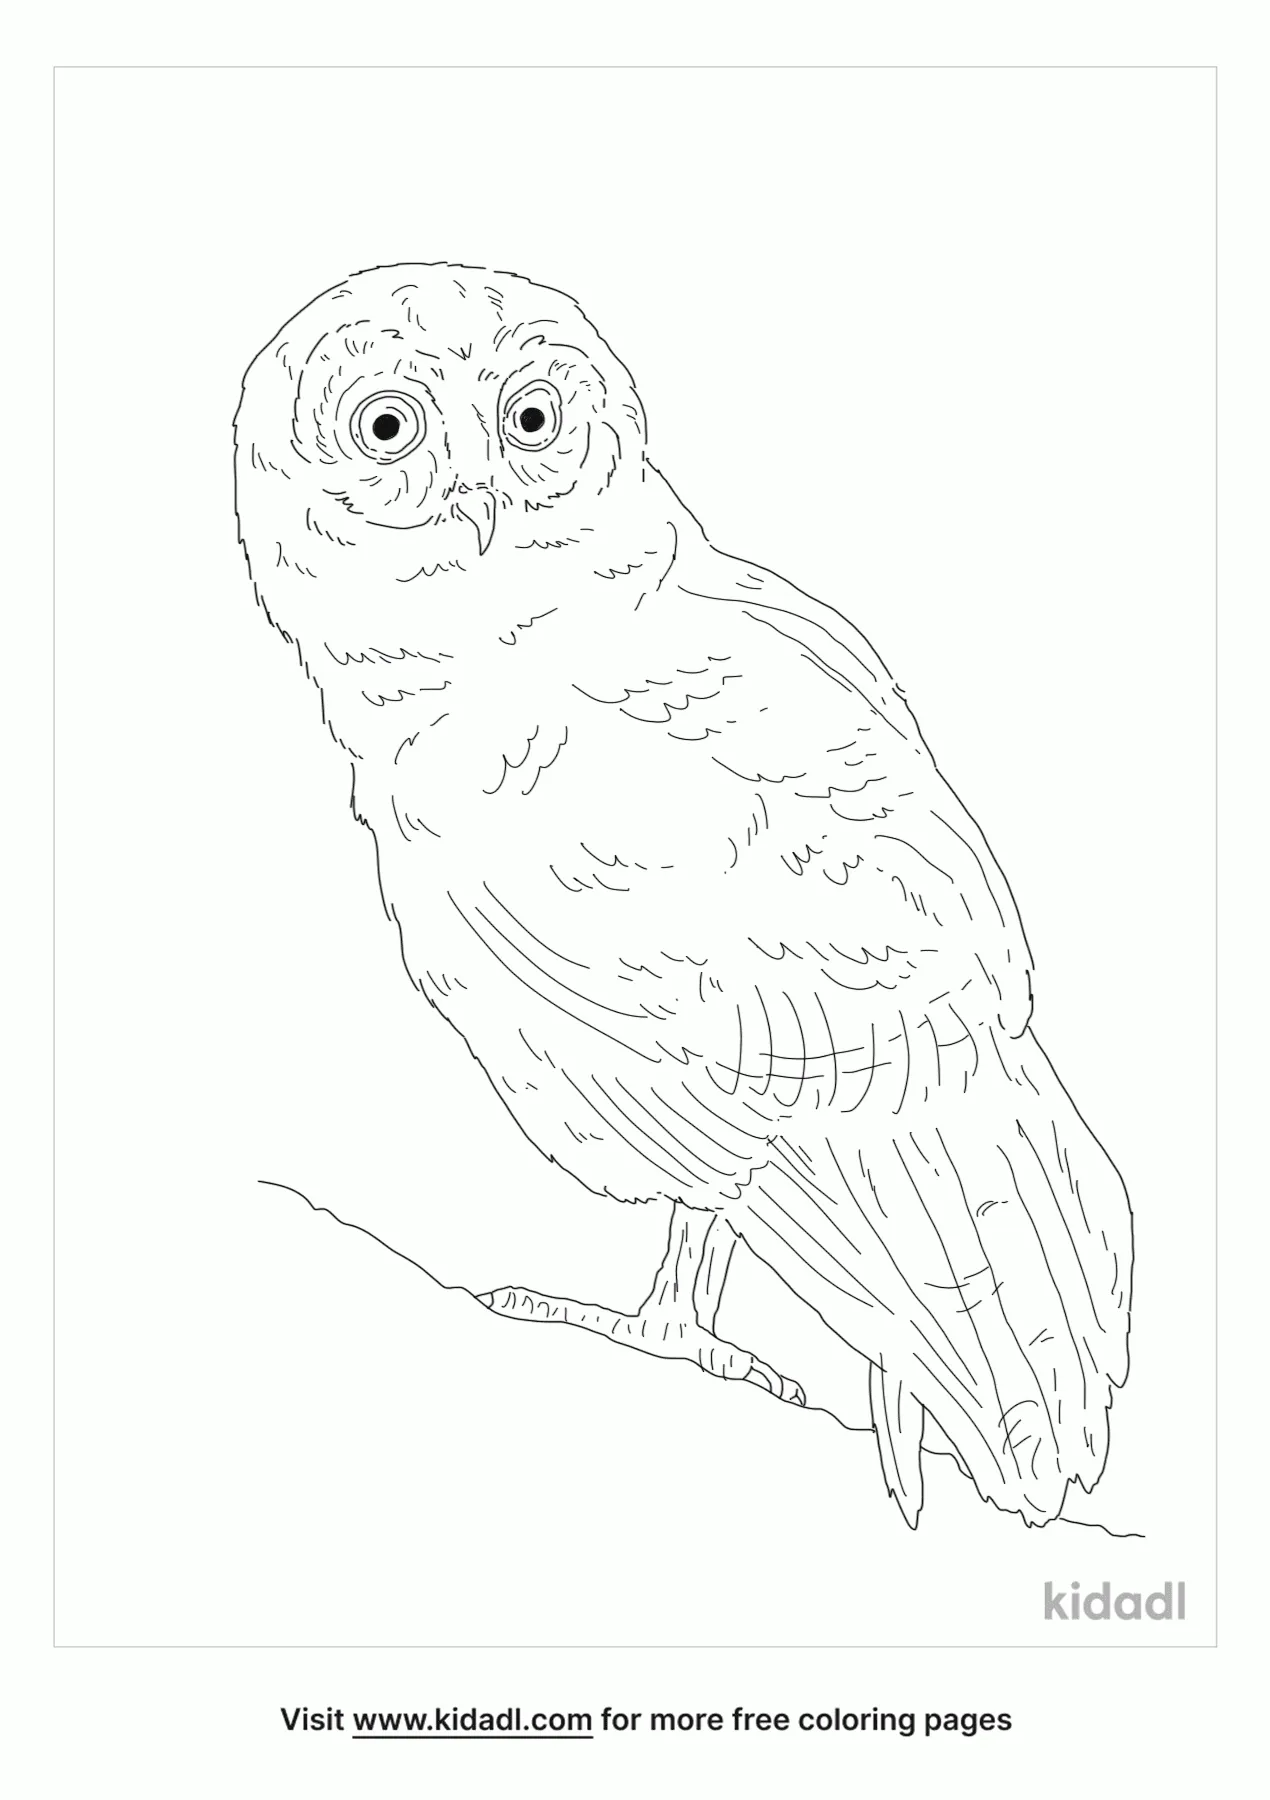 Mottled Wood Owl Coloring Page